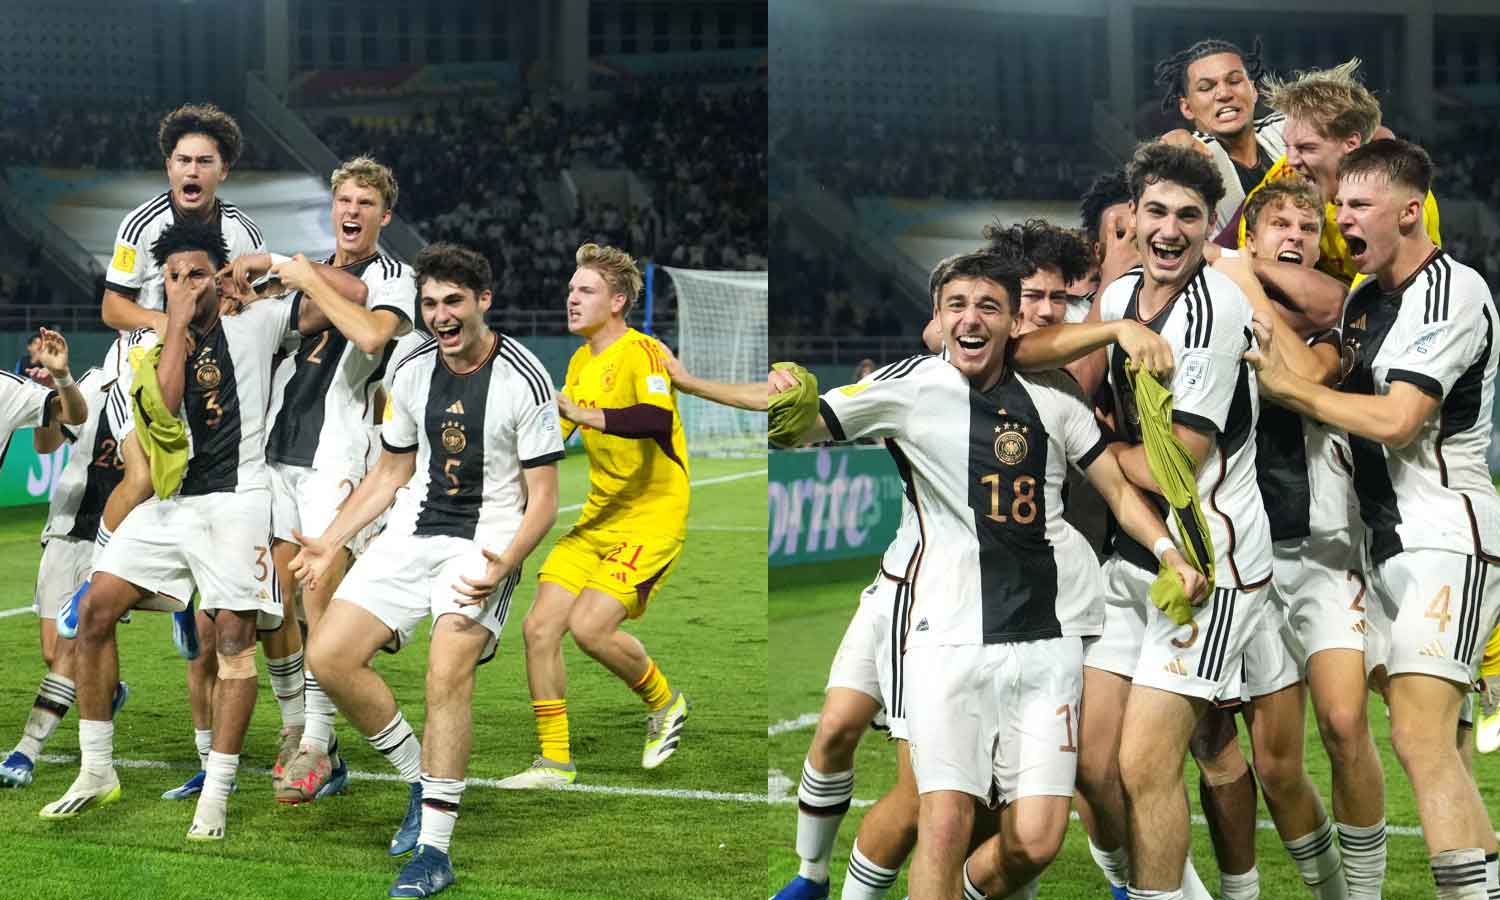 U-17 World Cup;  Germany’s maiden crown;  France was defeated in the penalty shootout